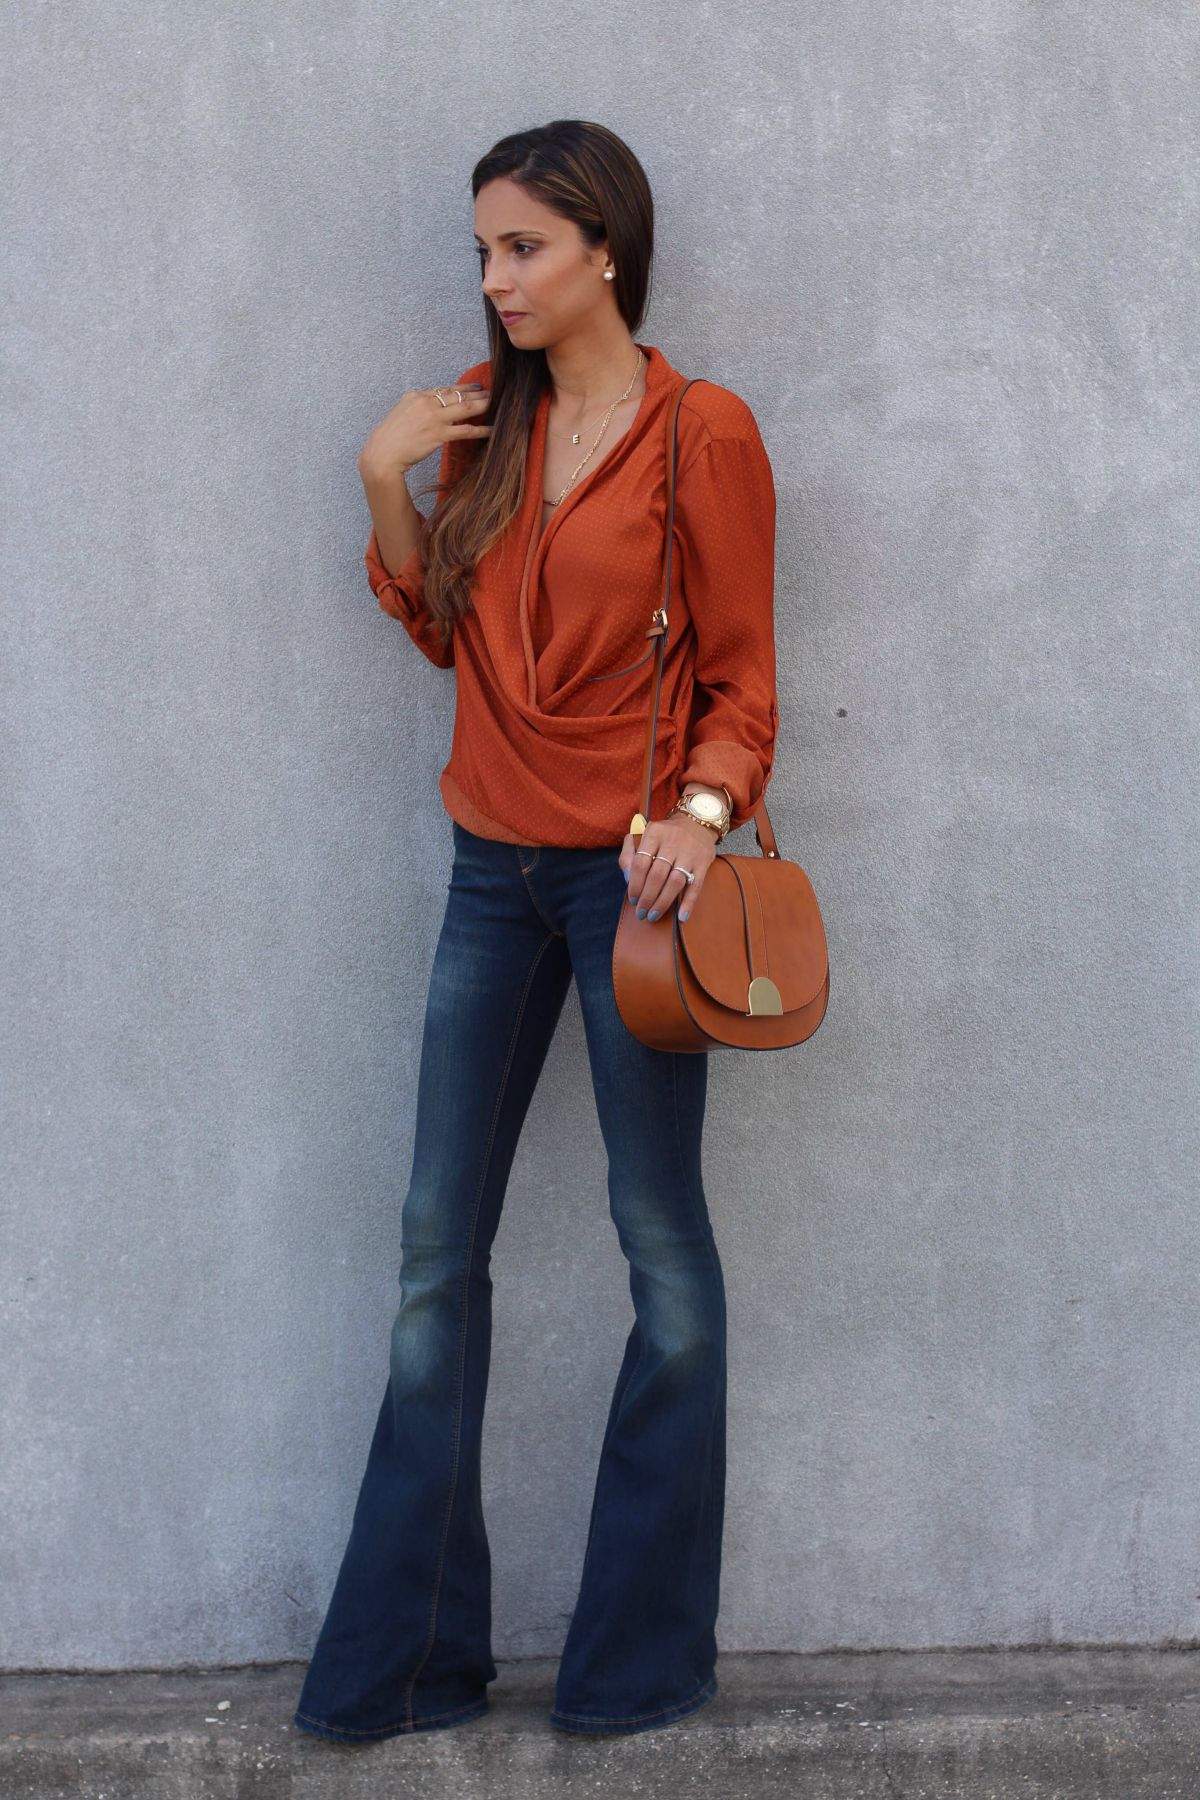 Free People stretchy flare jeans, a rust wrap blouse and wedges